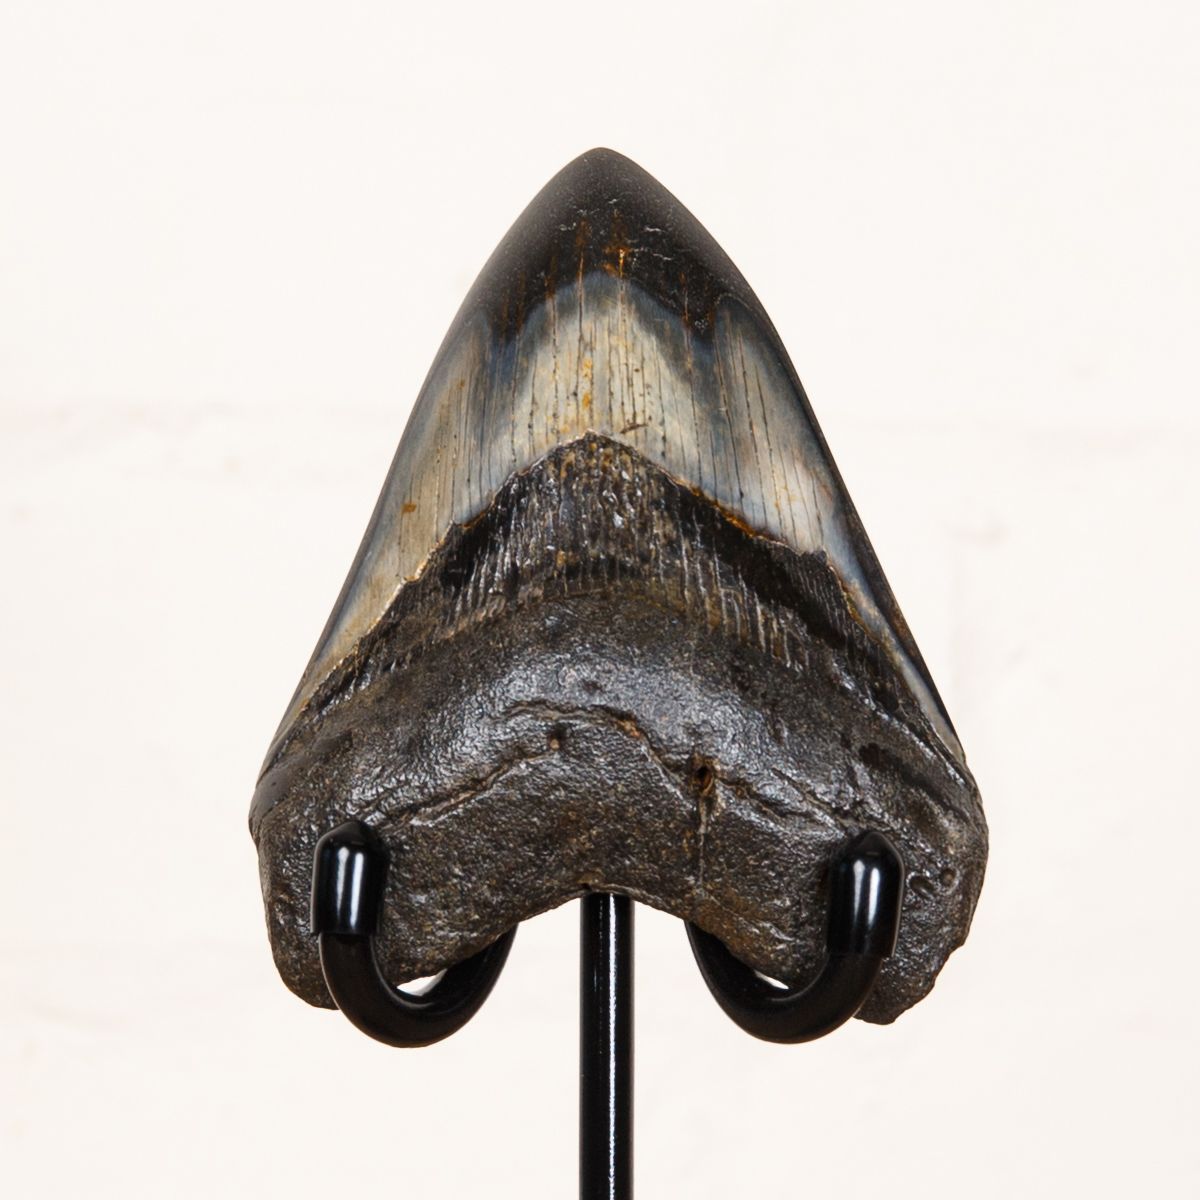 Collector Grade 3.9 Inch Polished Megalodon Shark Tooth Fossil on Stand (Carcharodon megalodon)